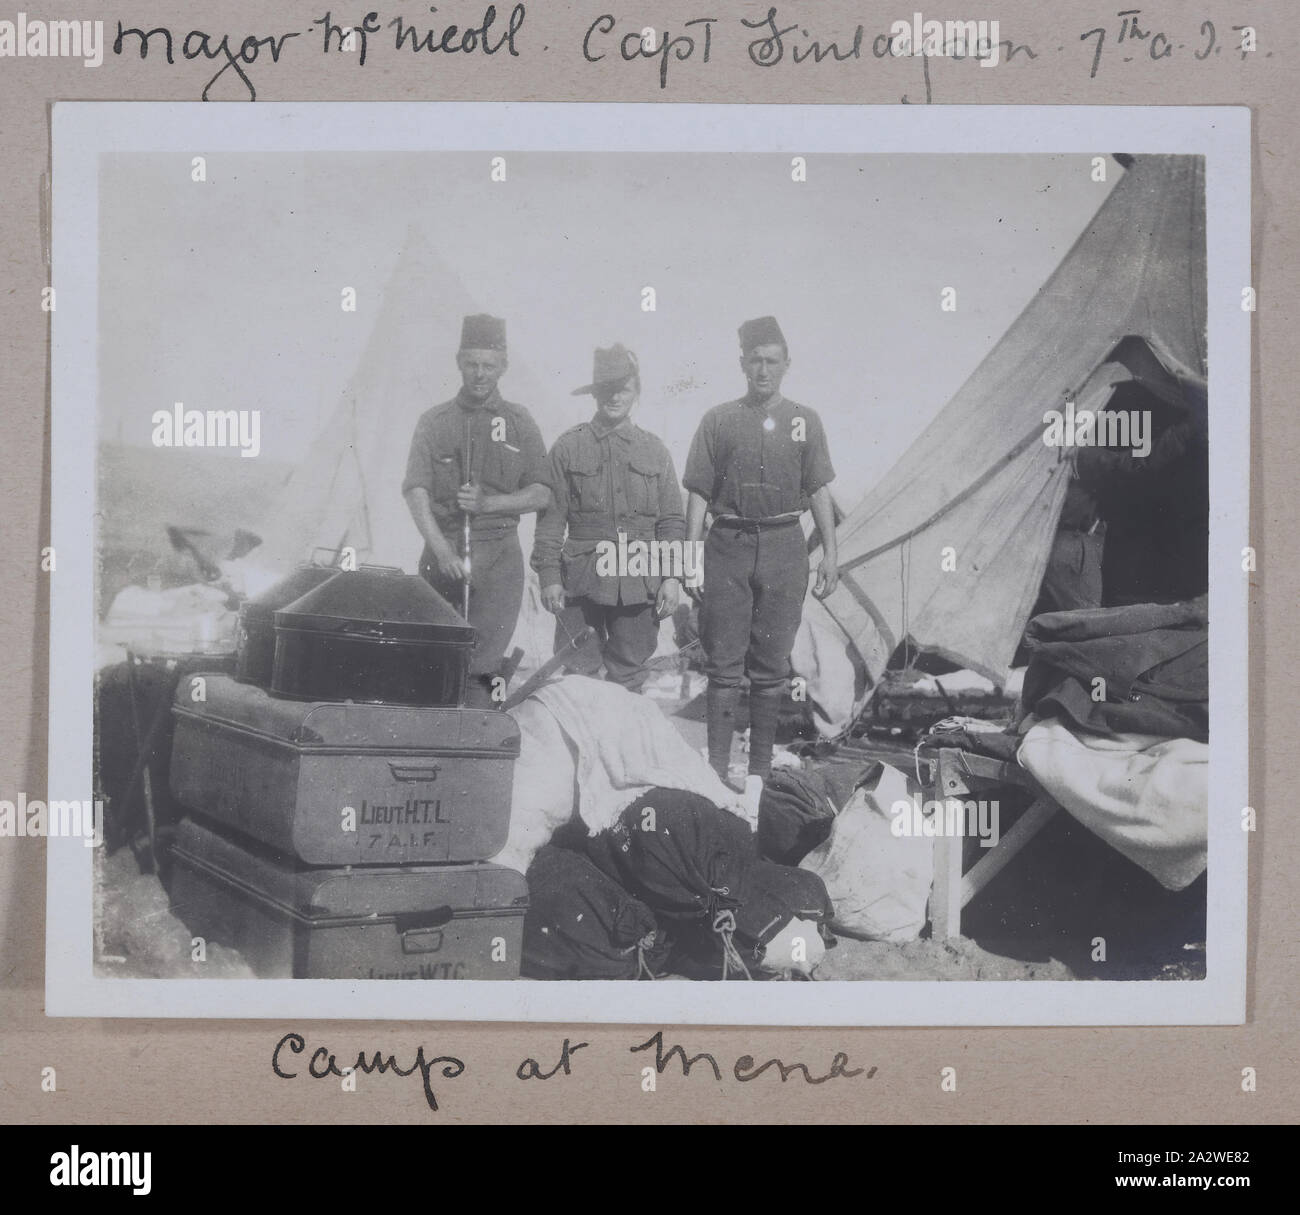 Photograph - 'Camp at Mena', Egypt, Captain Edward Albert McKenna, World War I, 1914-1915, One of 139 photographs in an album from World War I likely to have been taken by Captain Edward Albert McKenna. The photographs include the 7th Battalion training in Mena Camp, Egypt, and sight-seeing. Image depicting three men standing in what appears to be a tent being aired at Mena Camp. Mena Camp was one of three training camps in Egypt used by the A.I.F. and the N.Z.E.F Stock Photo